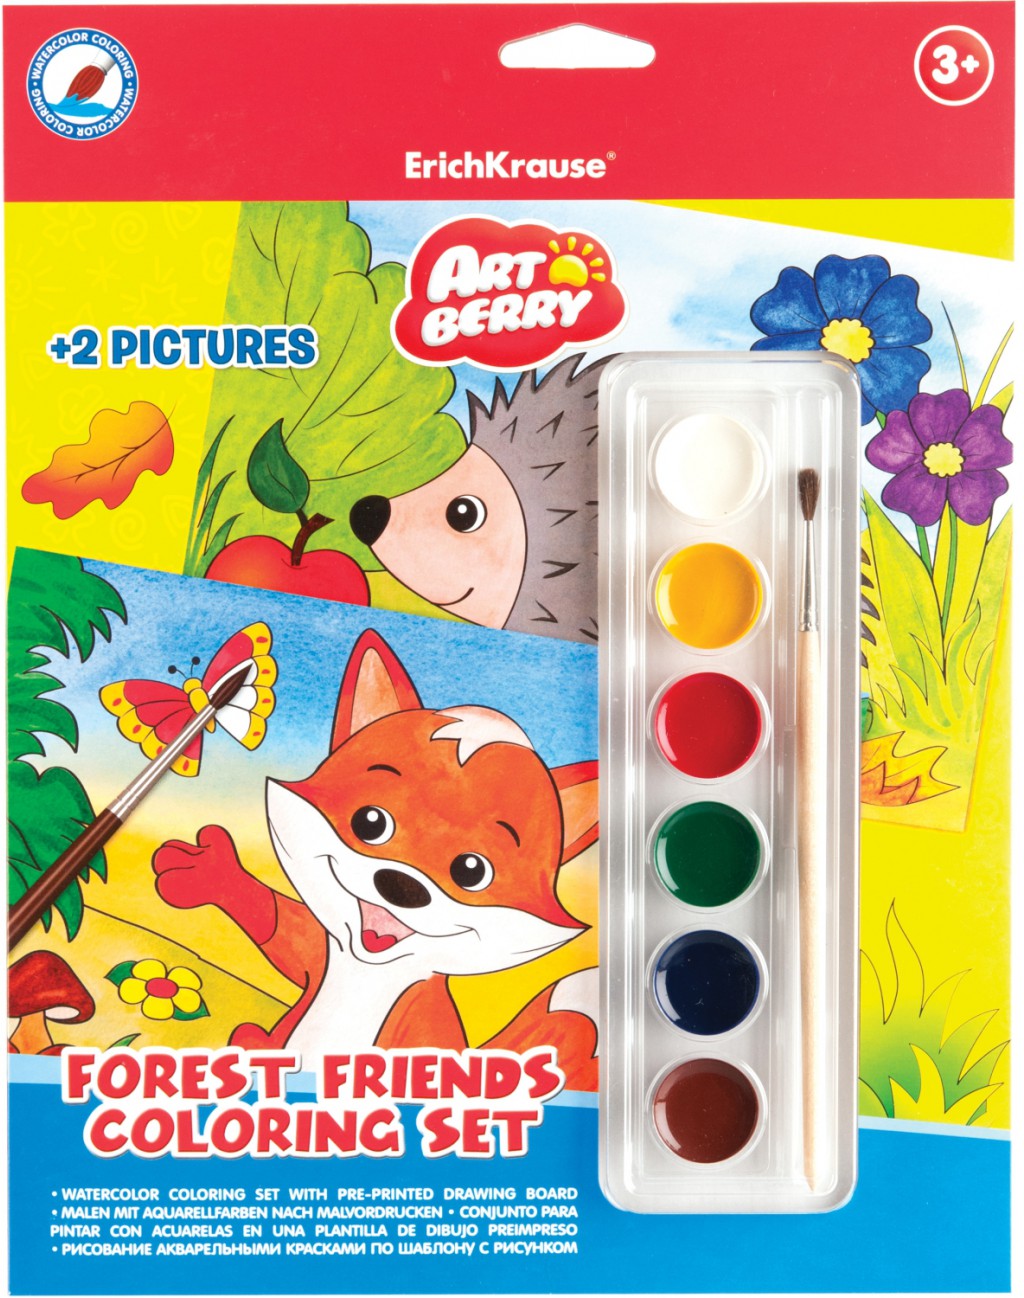 36962   6+2  Forest Friends Coloring Set Artberry 57,65.jpg